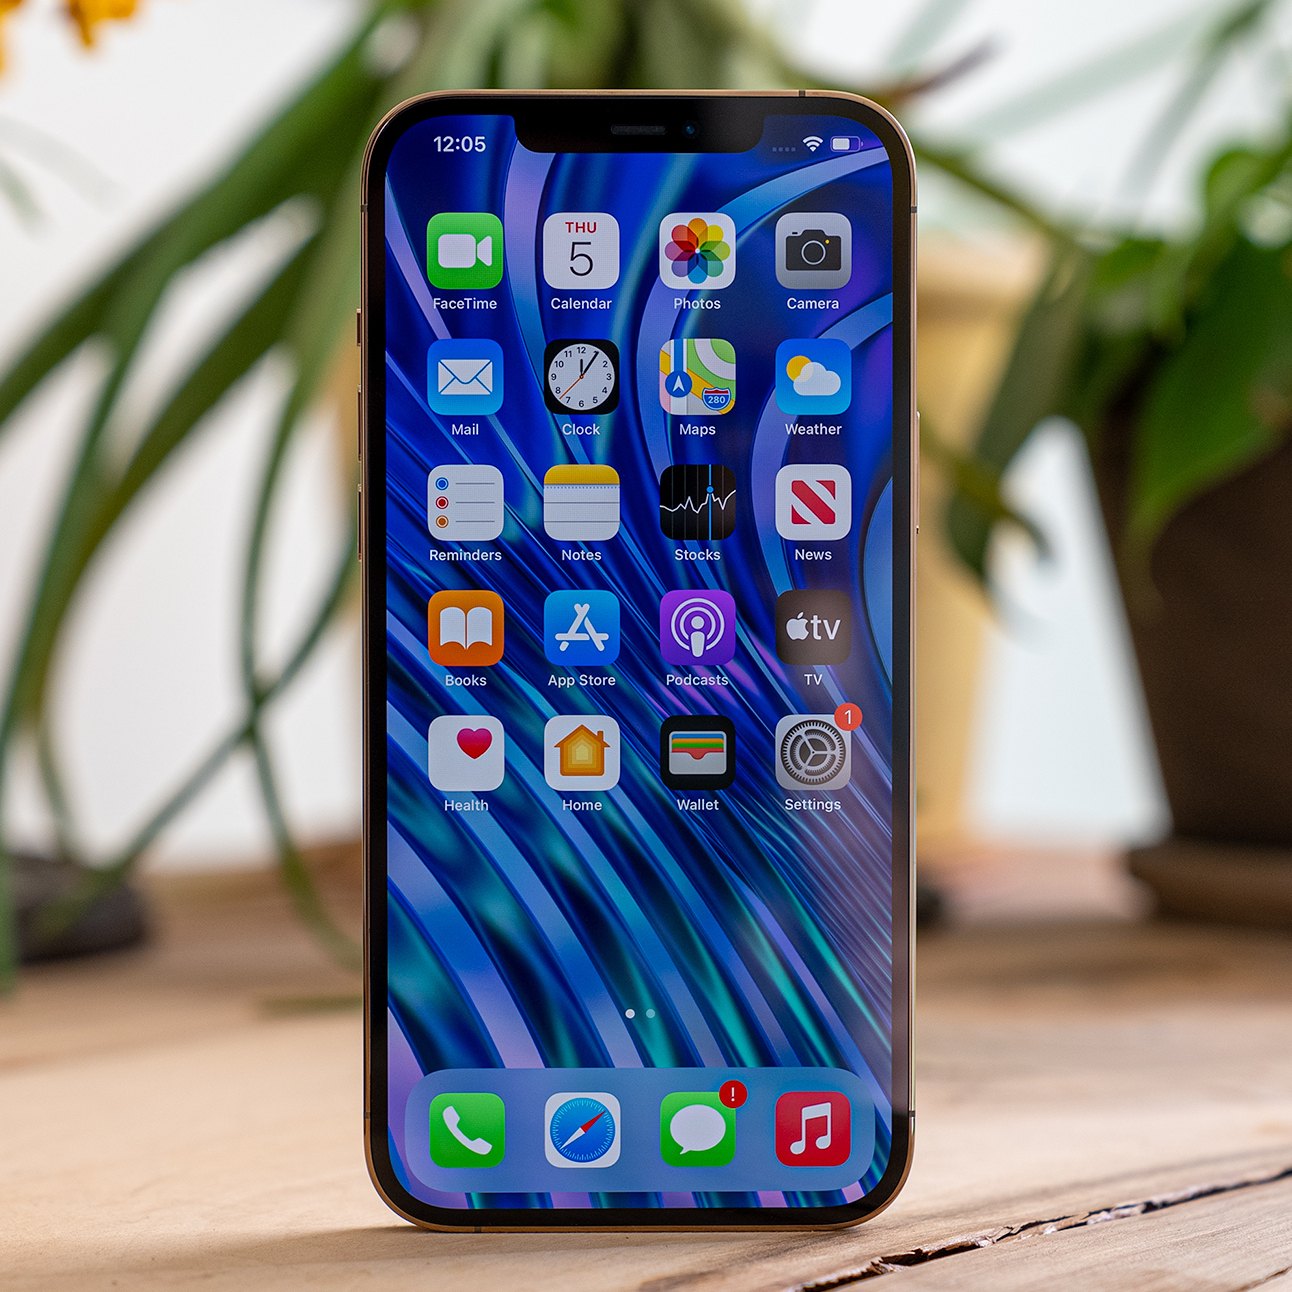 iPhone 12 Pro Max review: the best smartphone camera you can get - The